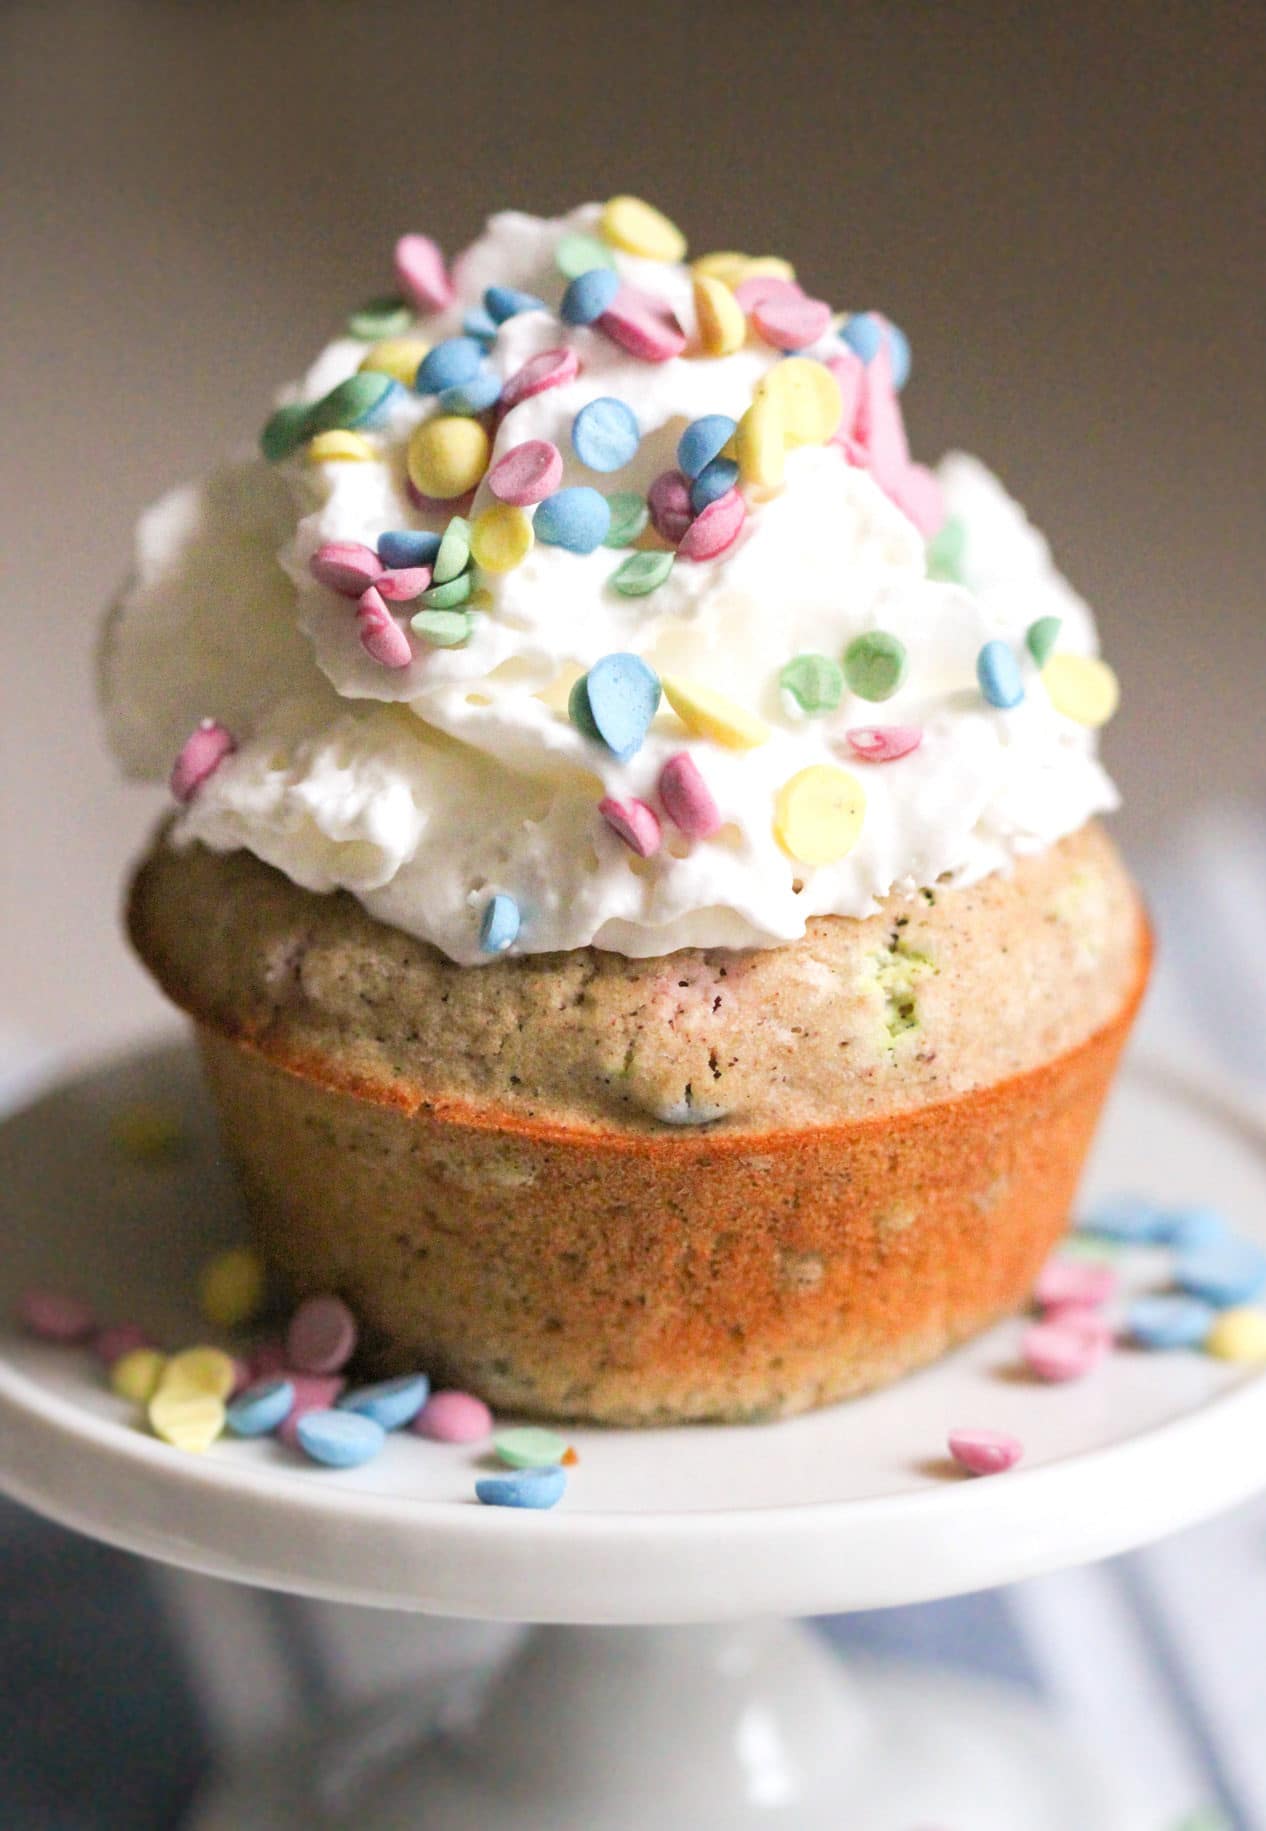 Healthy Funfetti Cupcakes! Craving Funfetti Cake but don't want all the calories, sugar, and artificial ingredients? Make these Healthy Funfetti Cupcakes! They’re all natural, sugar free, low fat, low calorie, and gluten free too. NO white sugar, white flour, artificial food dyes, or trans fats whatsoever. These light and fluffy cupcakes will blow your mind! Healthy Dessert Recipes with sugar free, low calorie, low fat, high protein, gluten free, dairy free, and vegan options at the Desserts With Benefits Blog (www.DessertsWithBenefits.com)